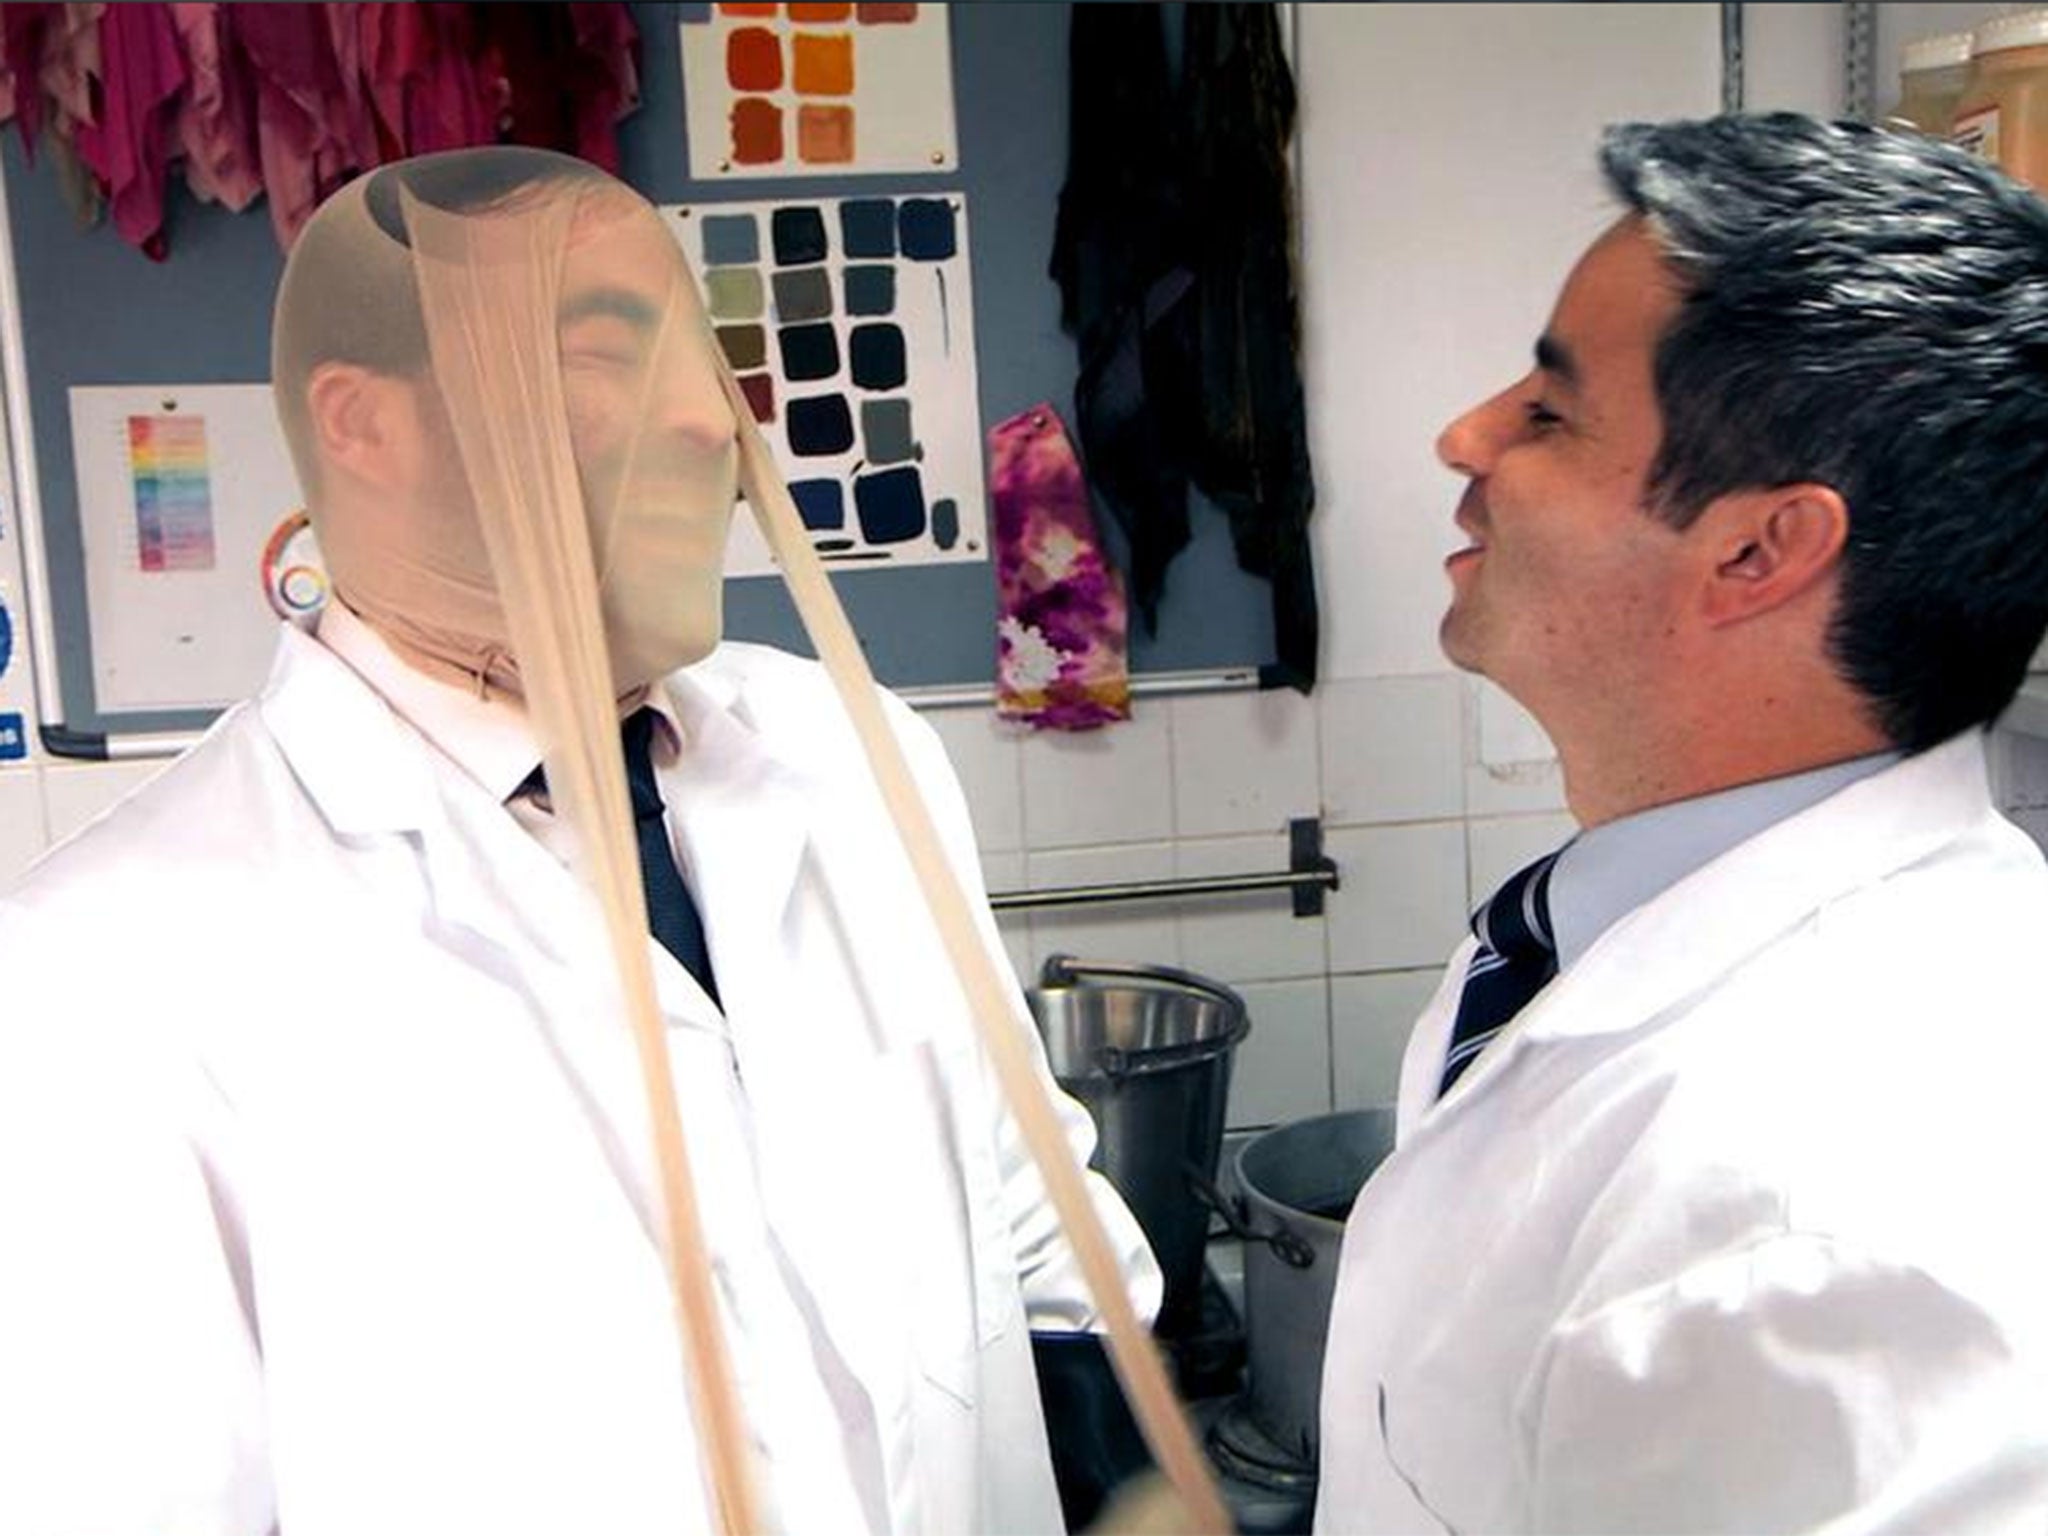 Daniel and Felipe play with tights in The Apprentice final